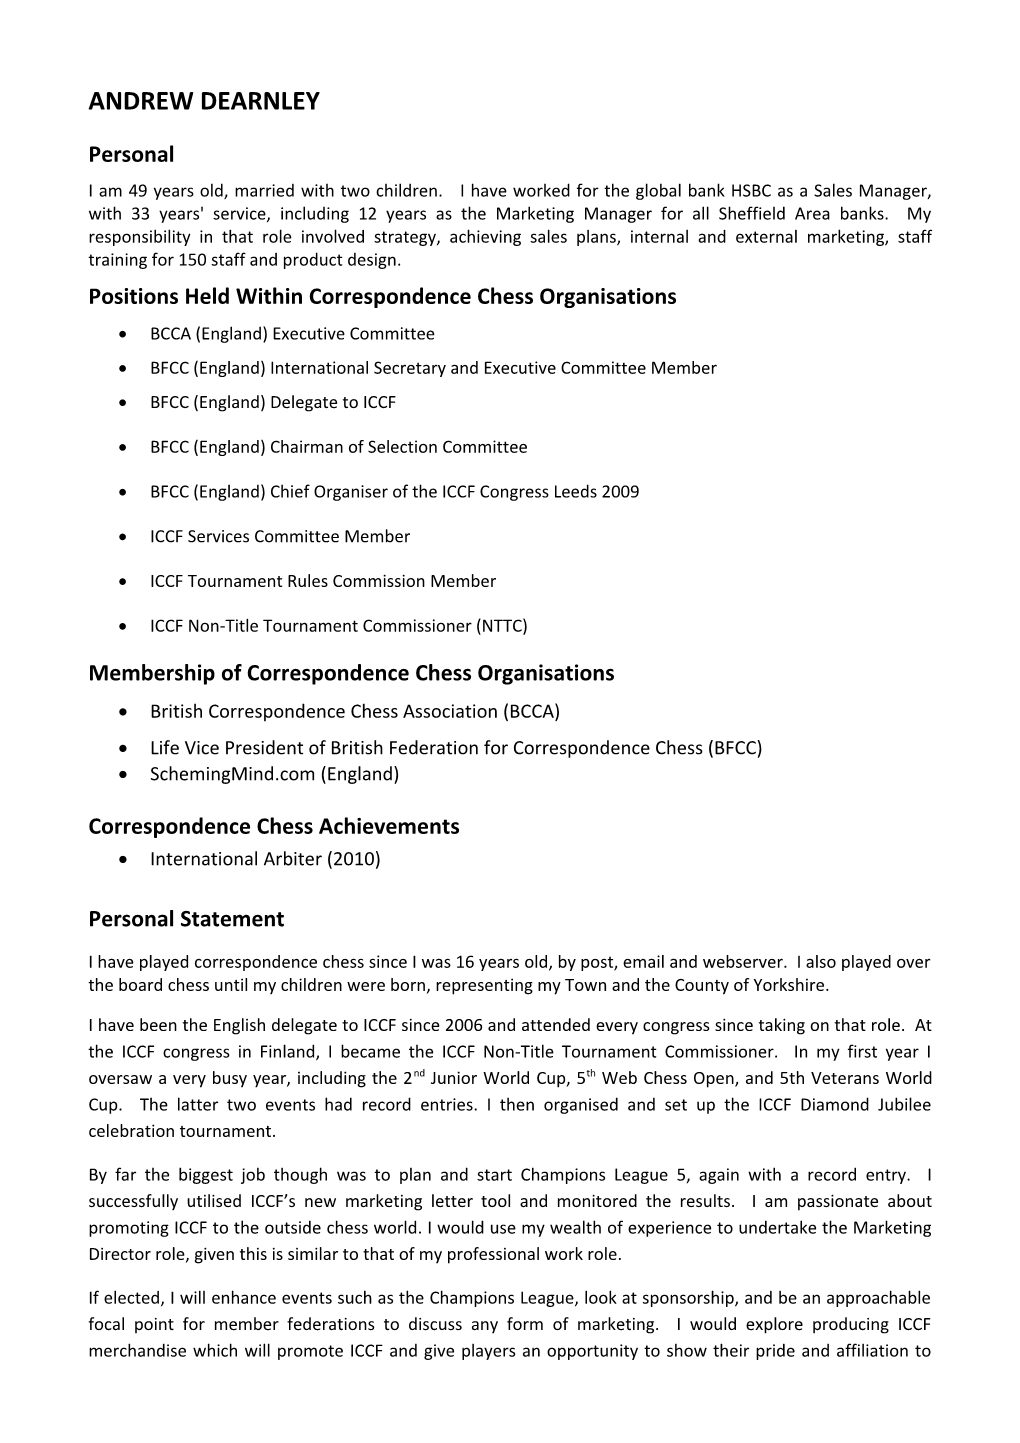 Positions Held Within Correspondence Chess Organisations